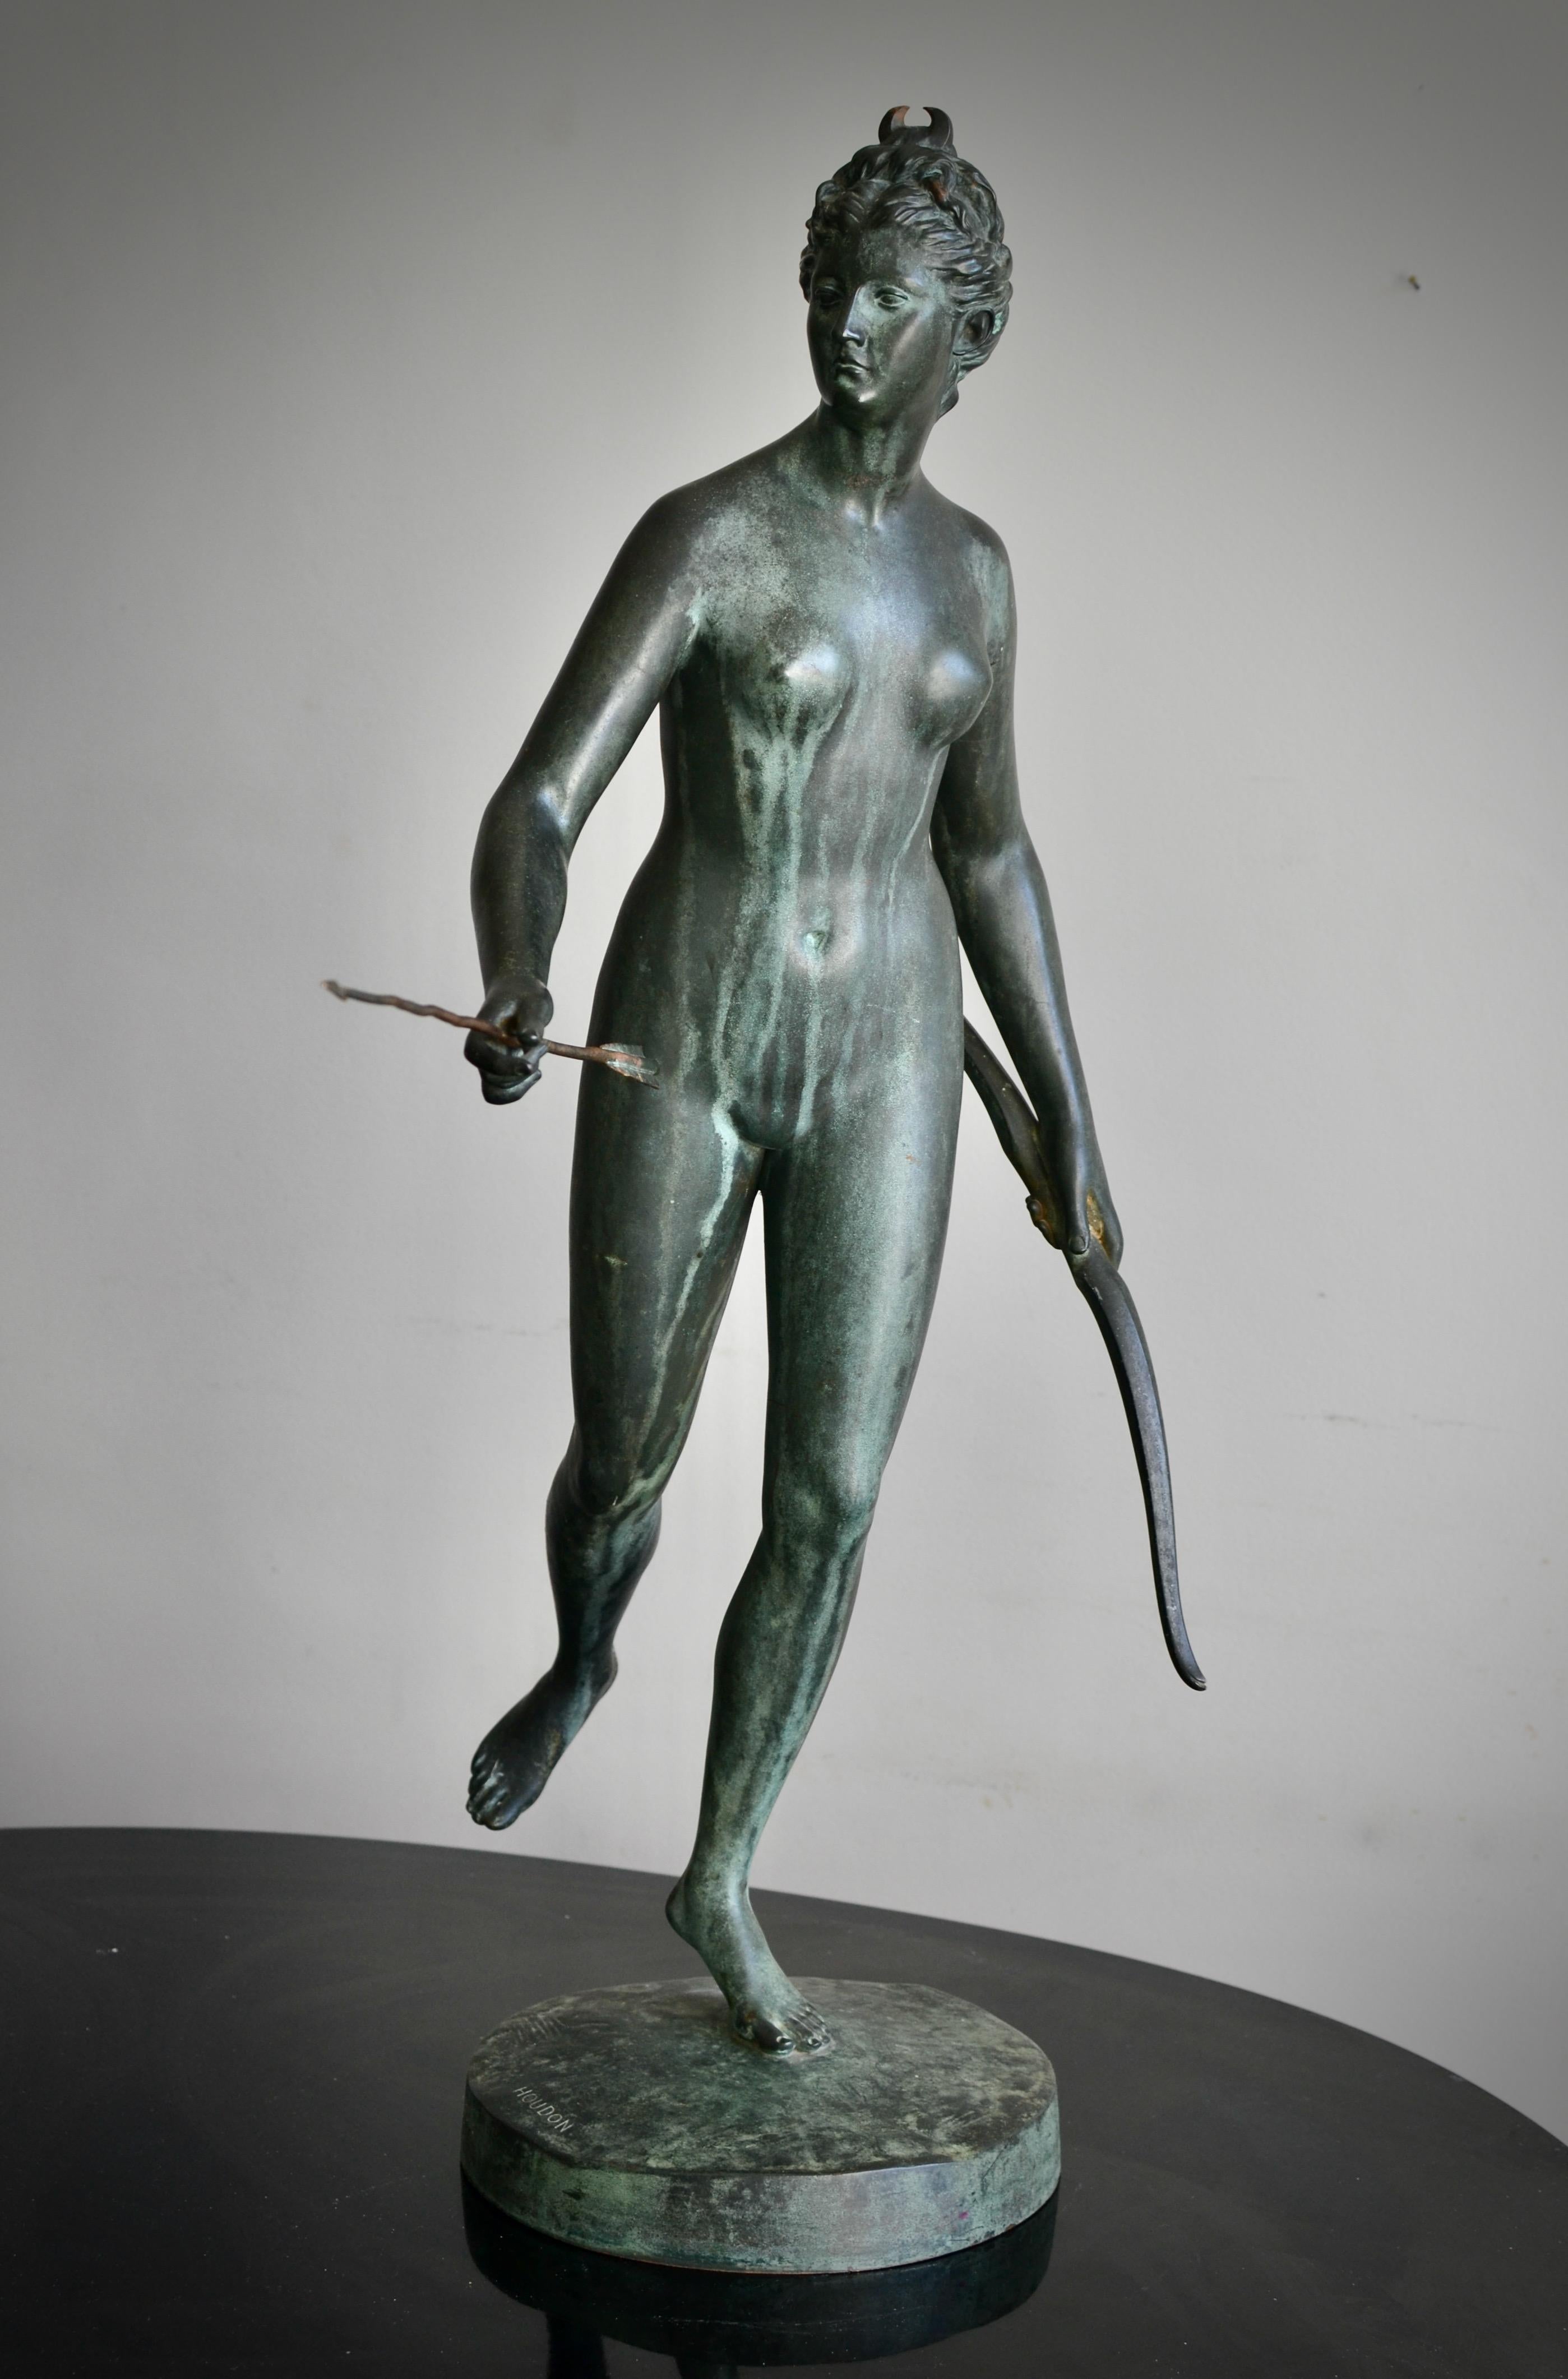 A very nice 19th century bronze sculpture of Diana the huntress with a very beautiful verdigris patina surface. Made after the famous sculpture by Jean-Antoine Houdon (1741-1828). This sculpture is signed 